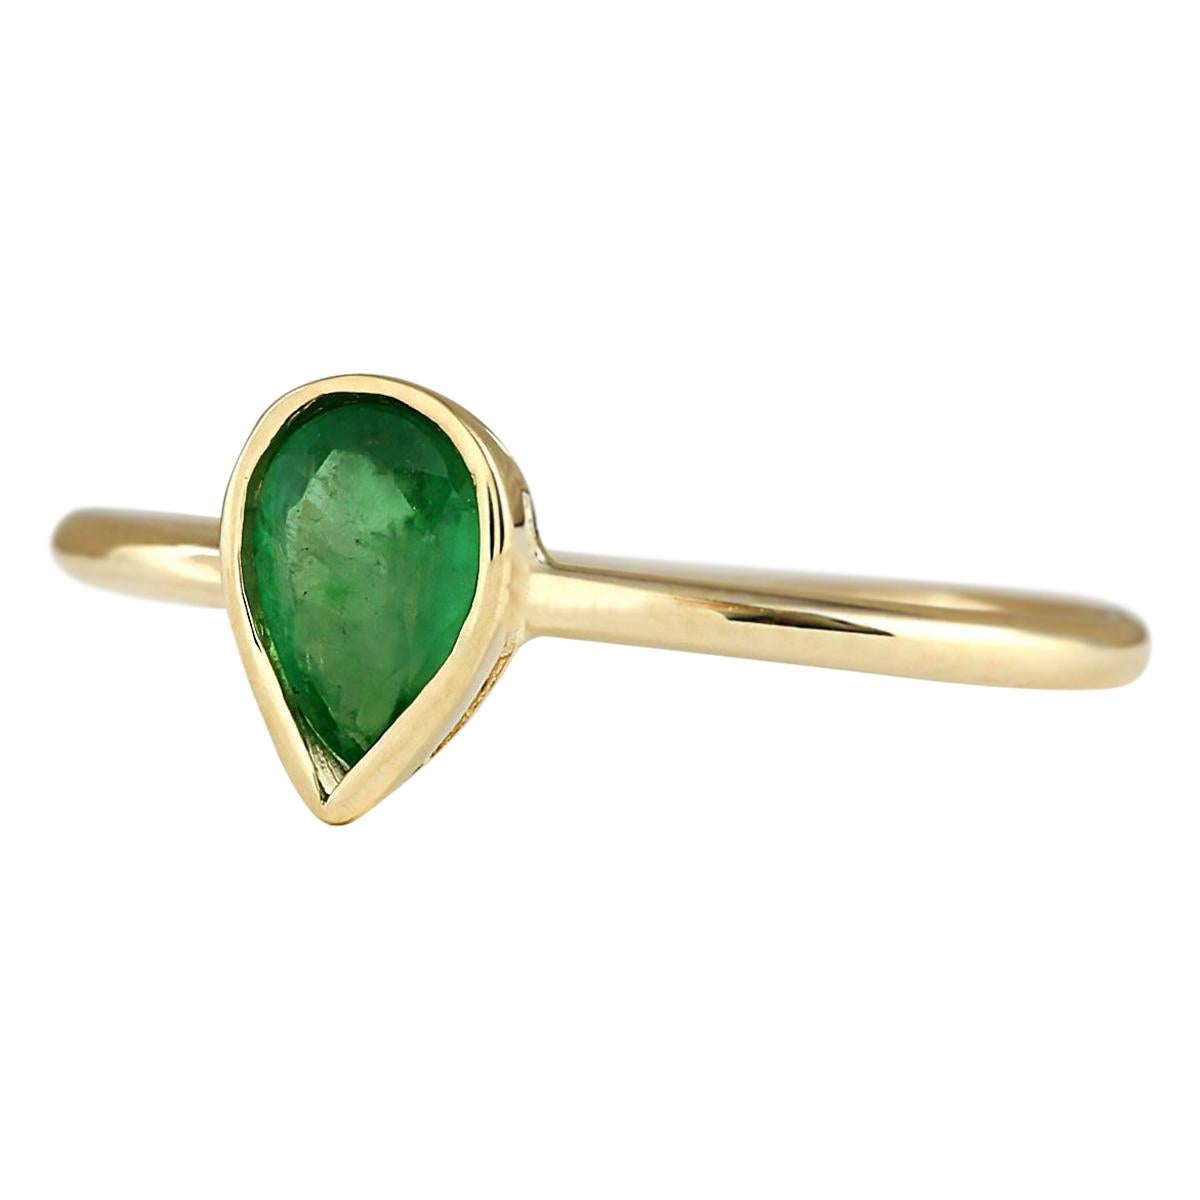 Stamped: 14K Yellow Gold
Total Ring Weight: 1.2 Grams
Total Natural Emerald Weight is 0.40 Carat
Color: Green
Face Measures: 7.00x5.00 mm
Sku: [703358W]